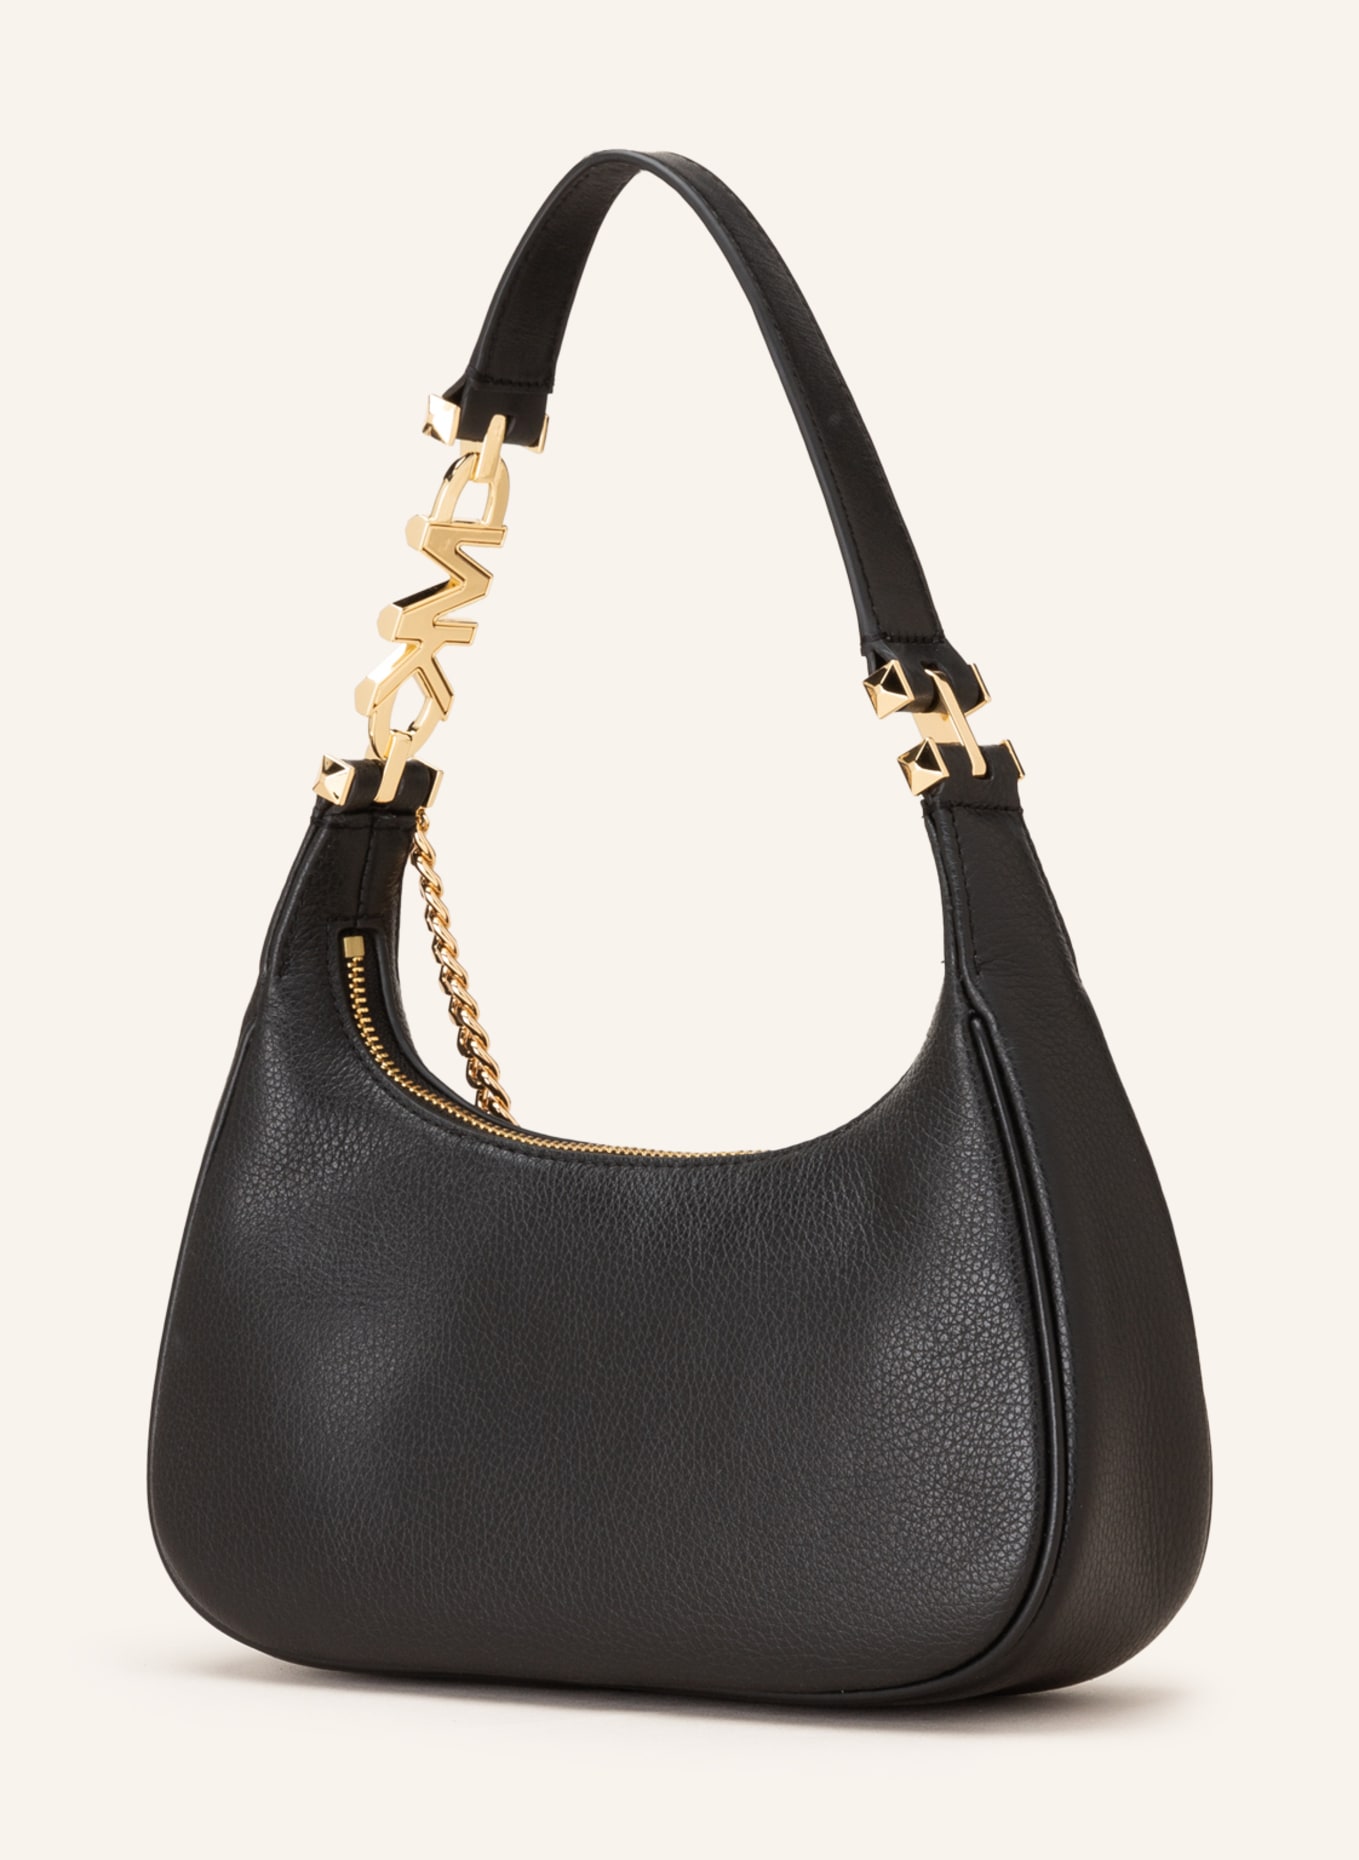 Piper Small Pebbled Leather Shoulder Bag